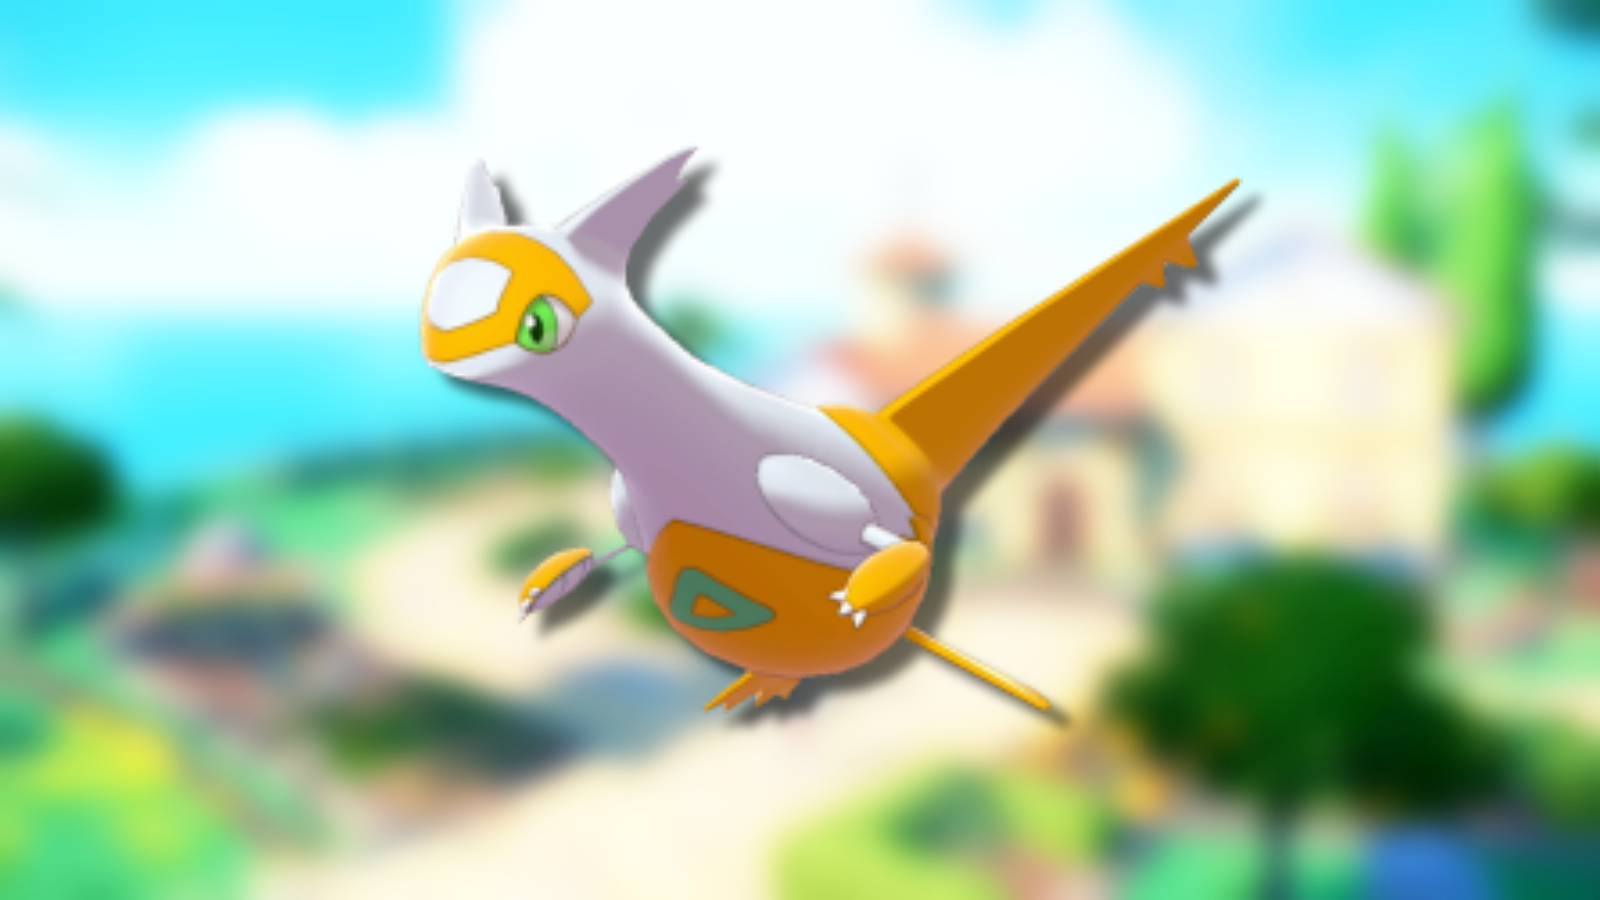 A Shiny version of the Legendary Pokemon Latias appears against a blurred background